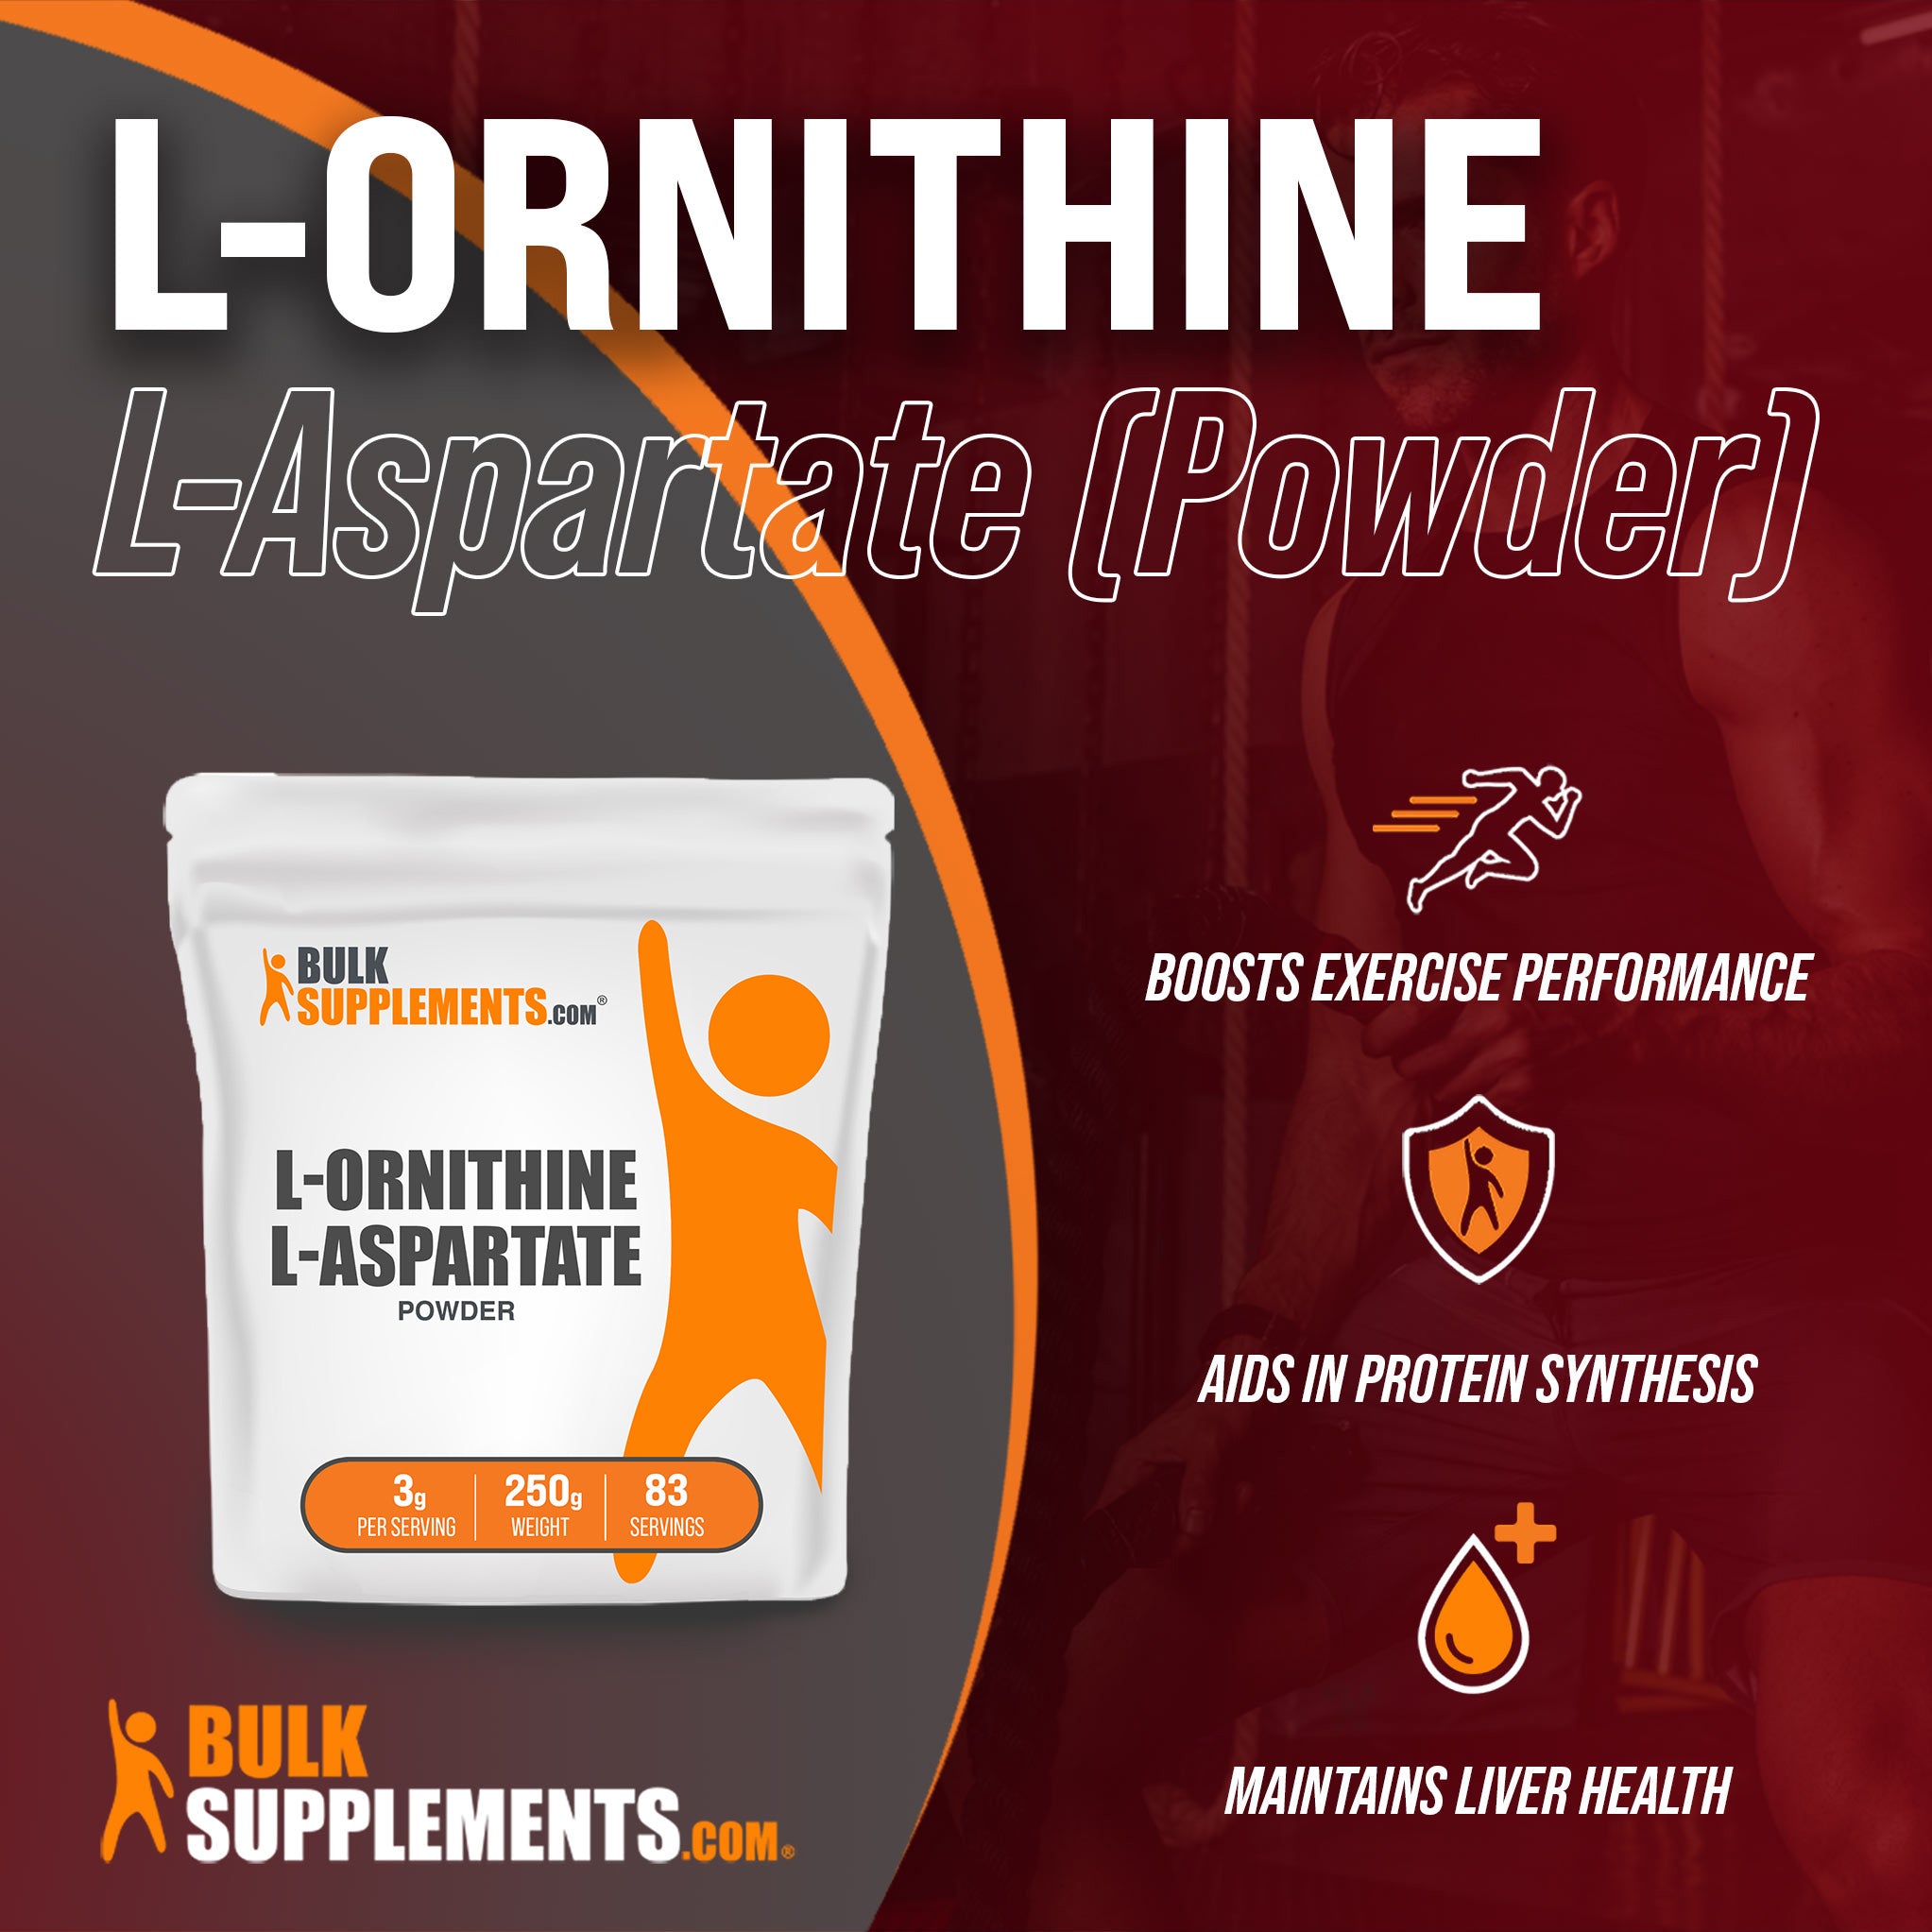 Benefits of L-Ornithine L-Aspartate: boosts exercise performance, aids in protein synthesis, maintains liver health